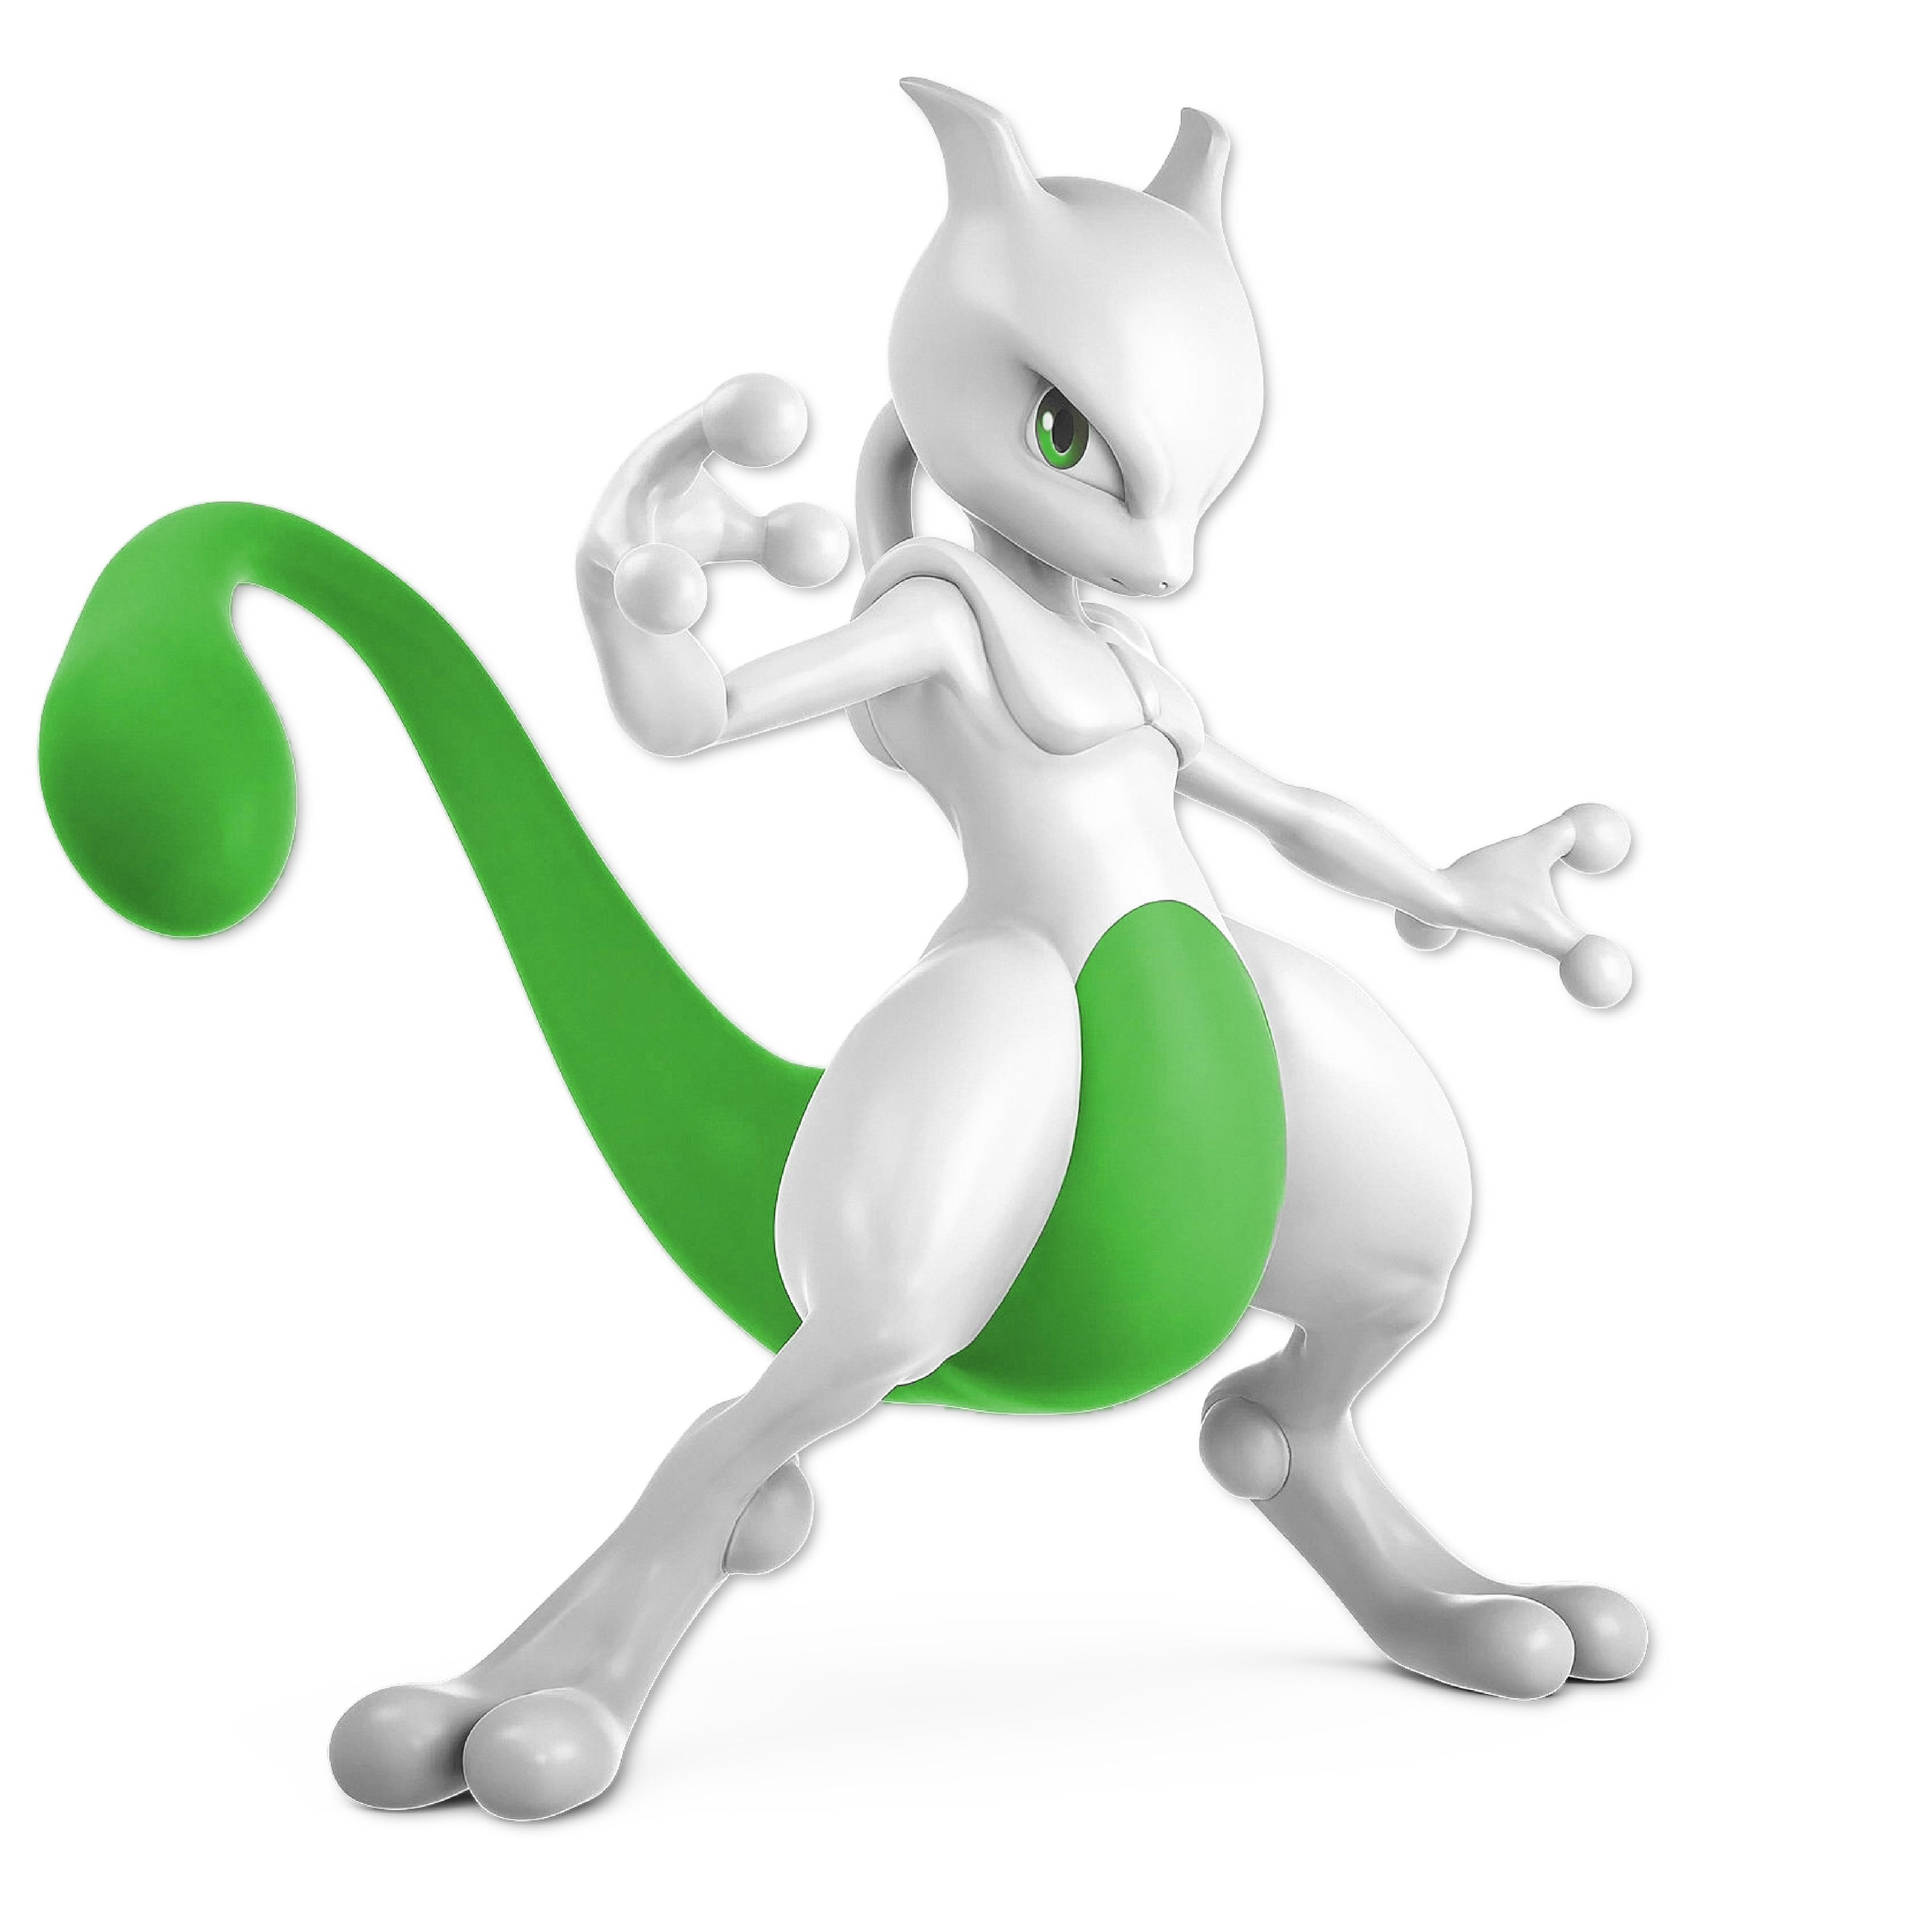 Top 999+ Shiny Mewtwo Wallpaper Full HD, 4K✅Free to Use